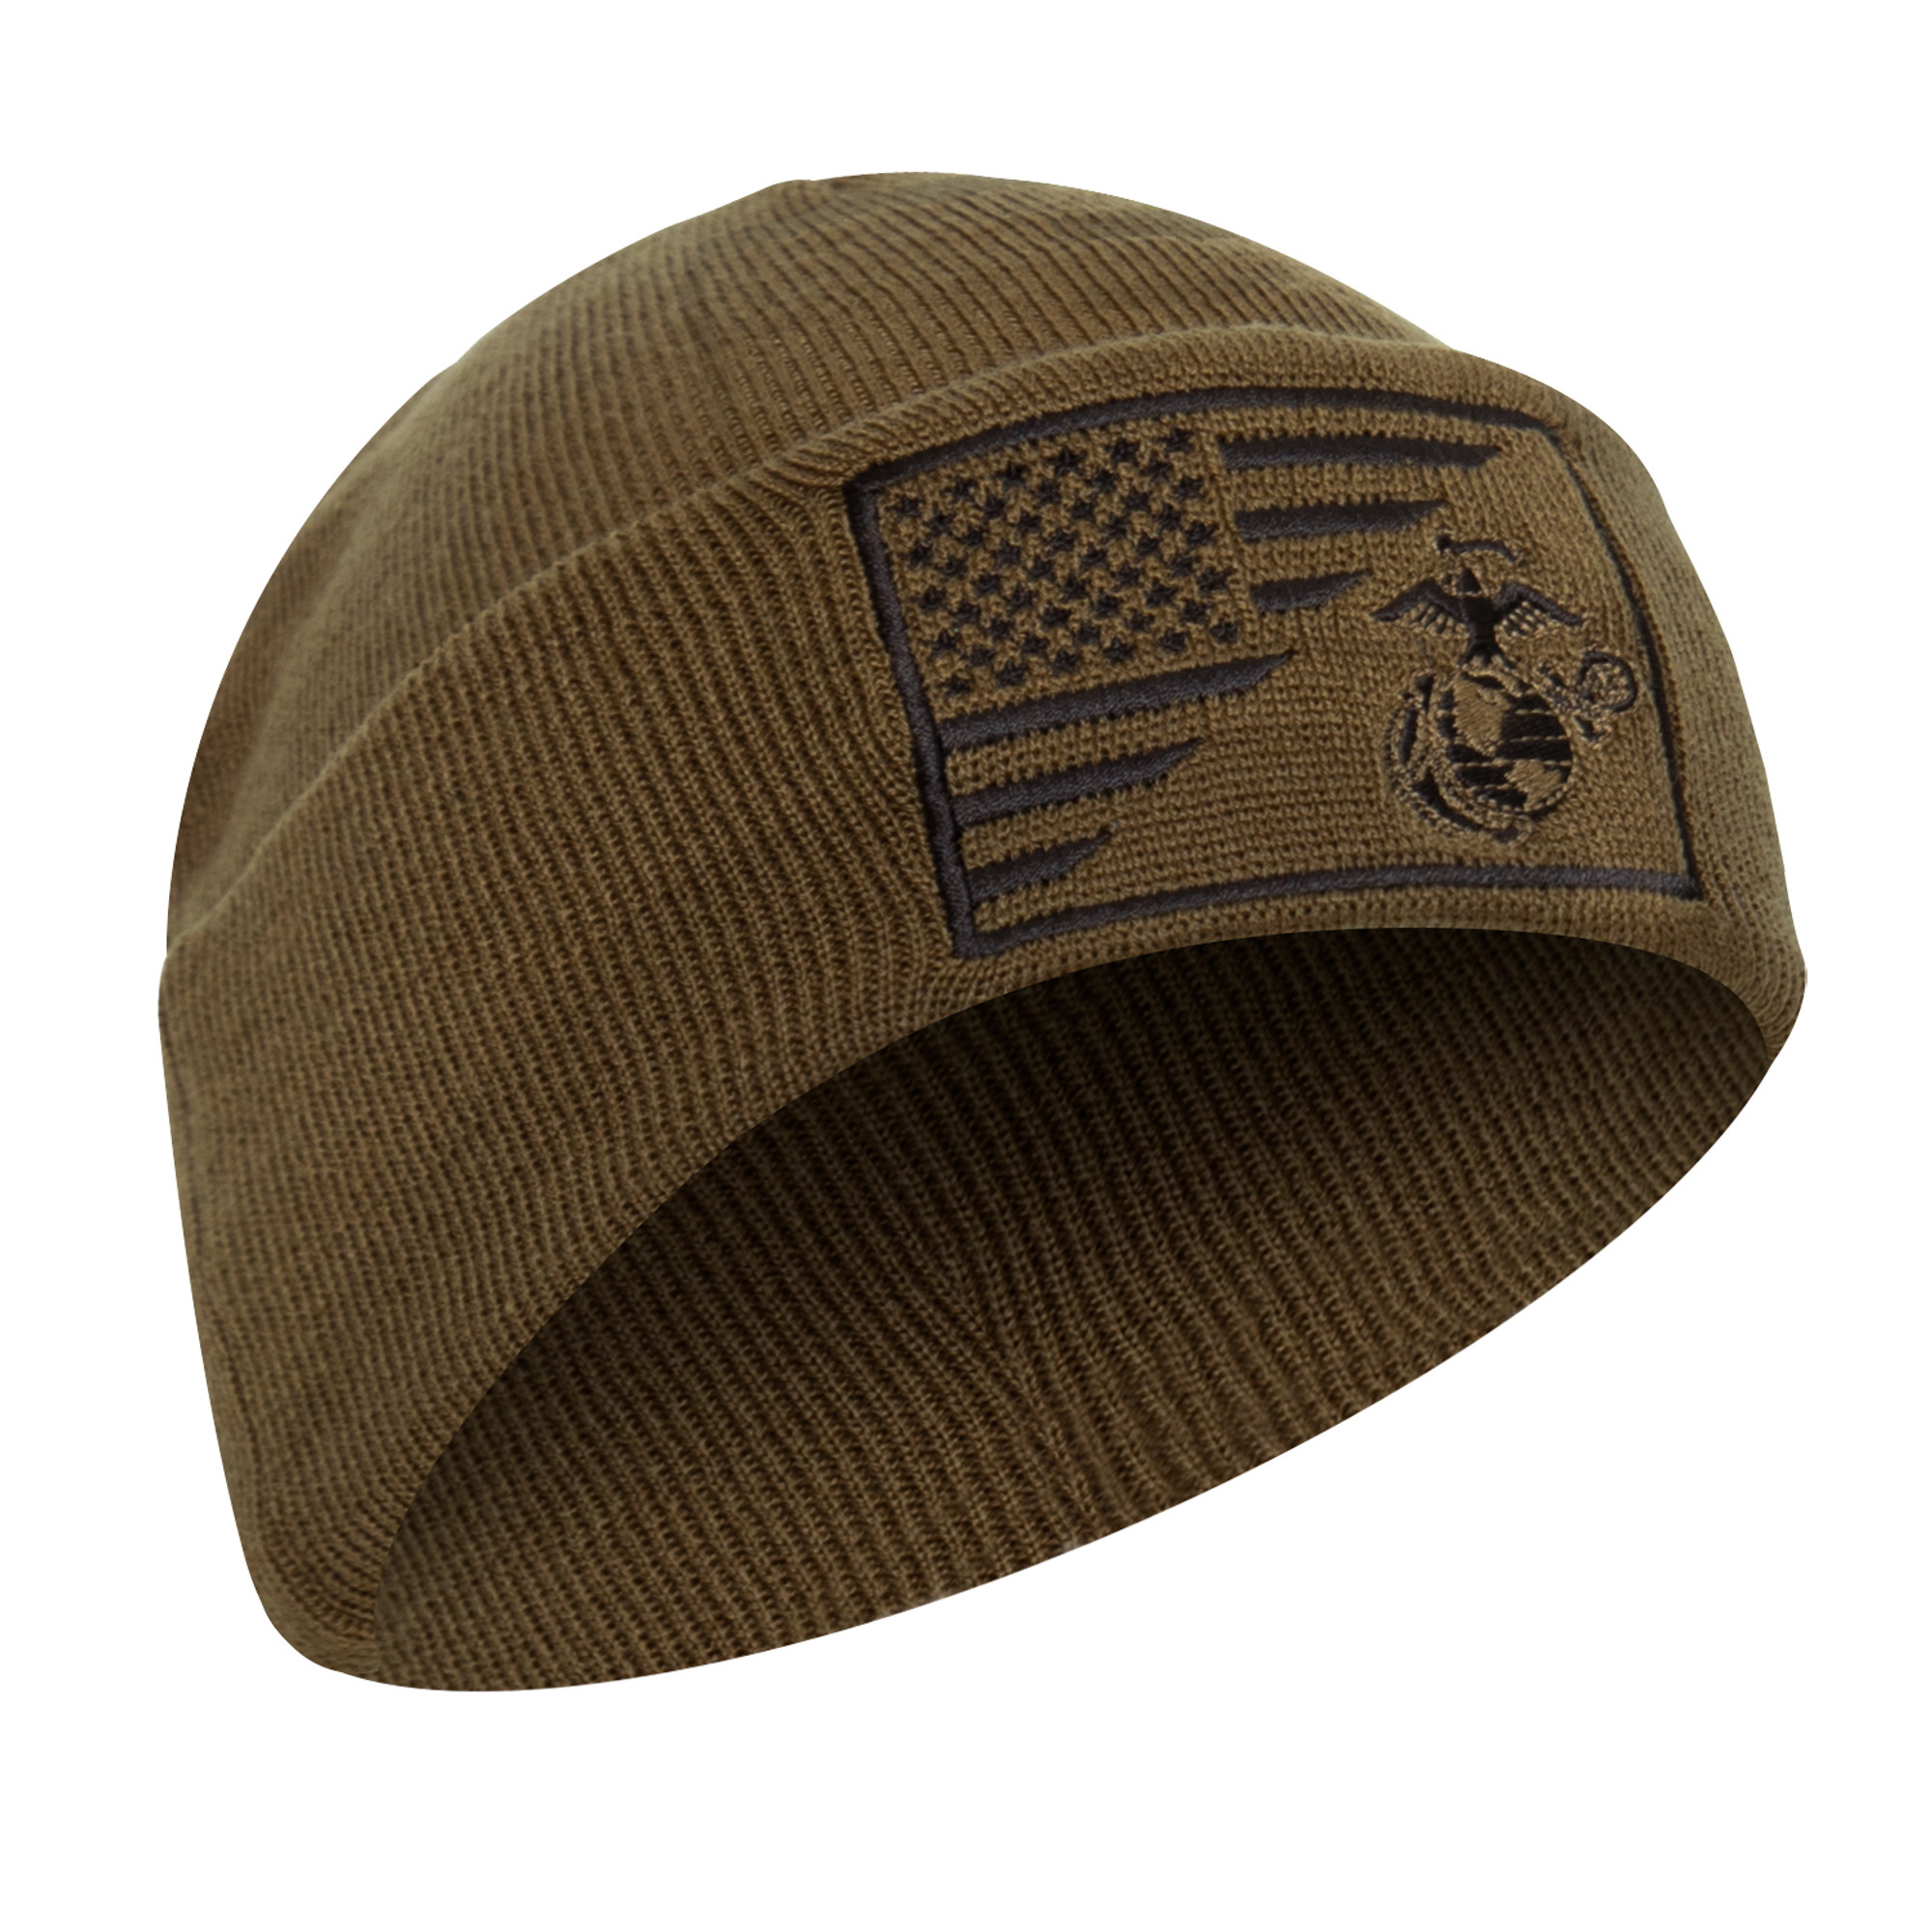 Rothco USMC Eagle, Globe and Anchor/US Flag Deluxe Fine Knit Watch Cap - Coyote Brown